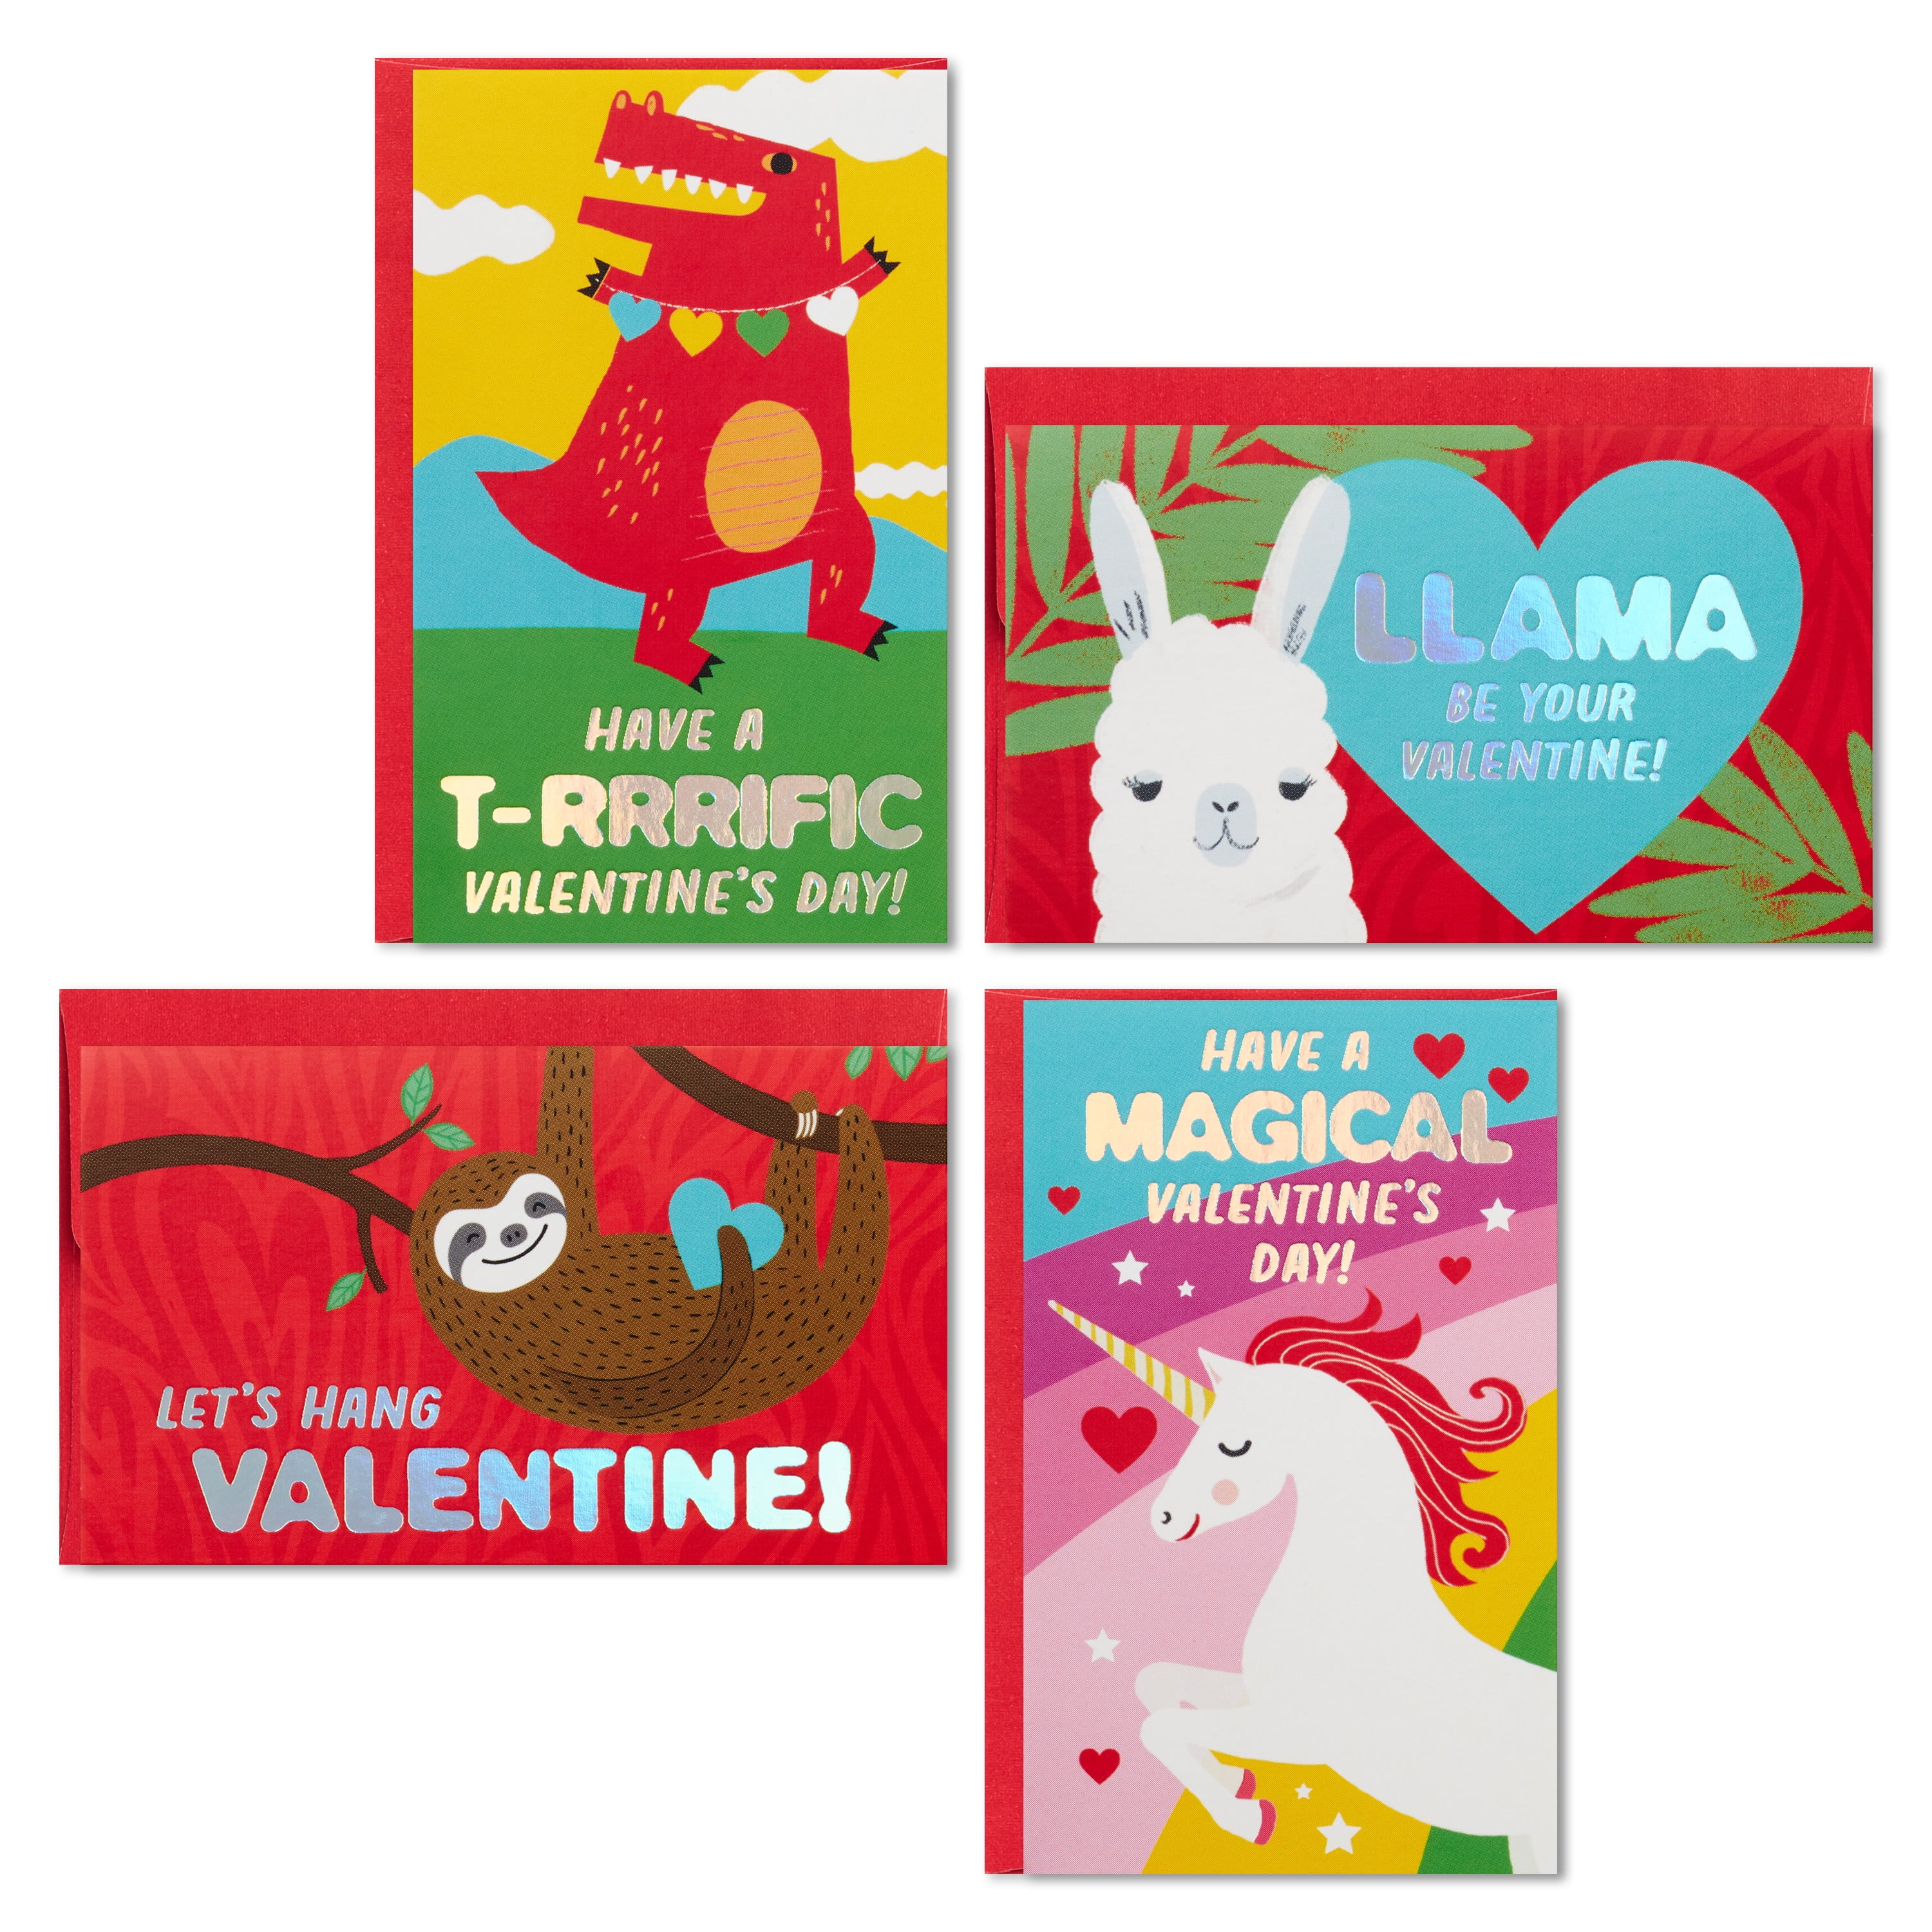 Hallmark Mini Valentines Day Cards Assortment, 18 Cards with Envelopes  (Vintage, Be My Valentine)